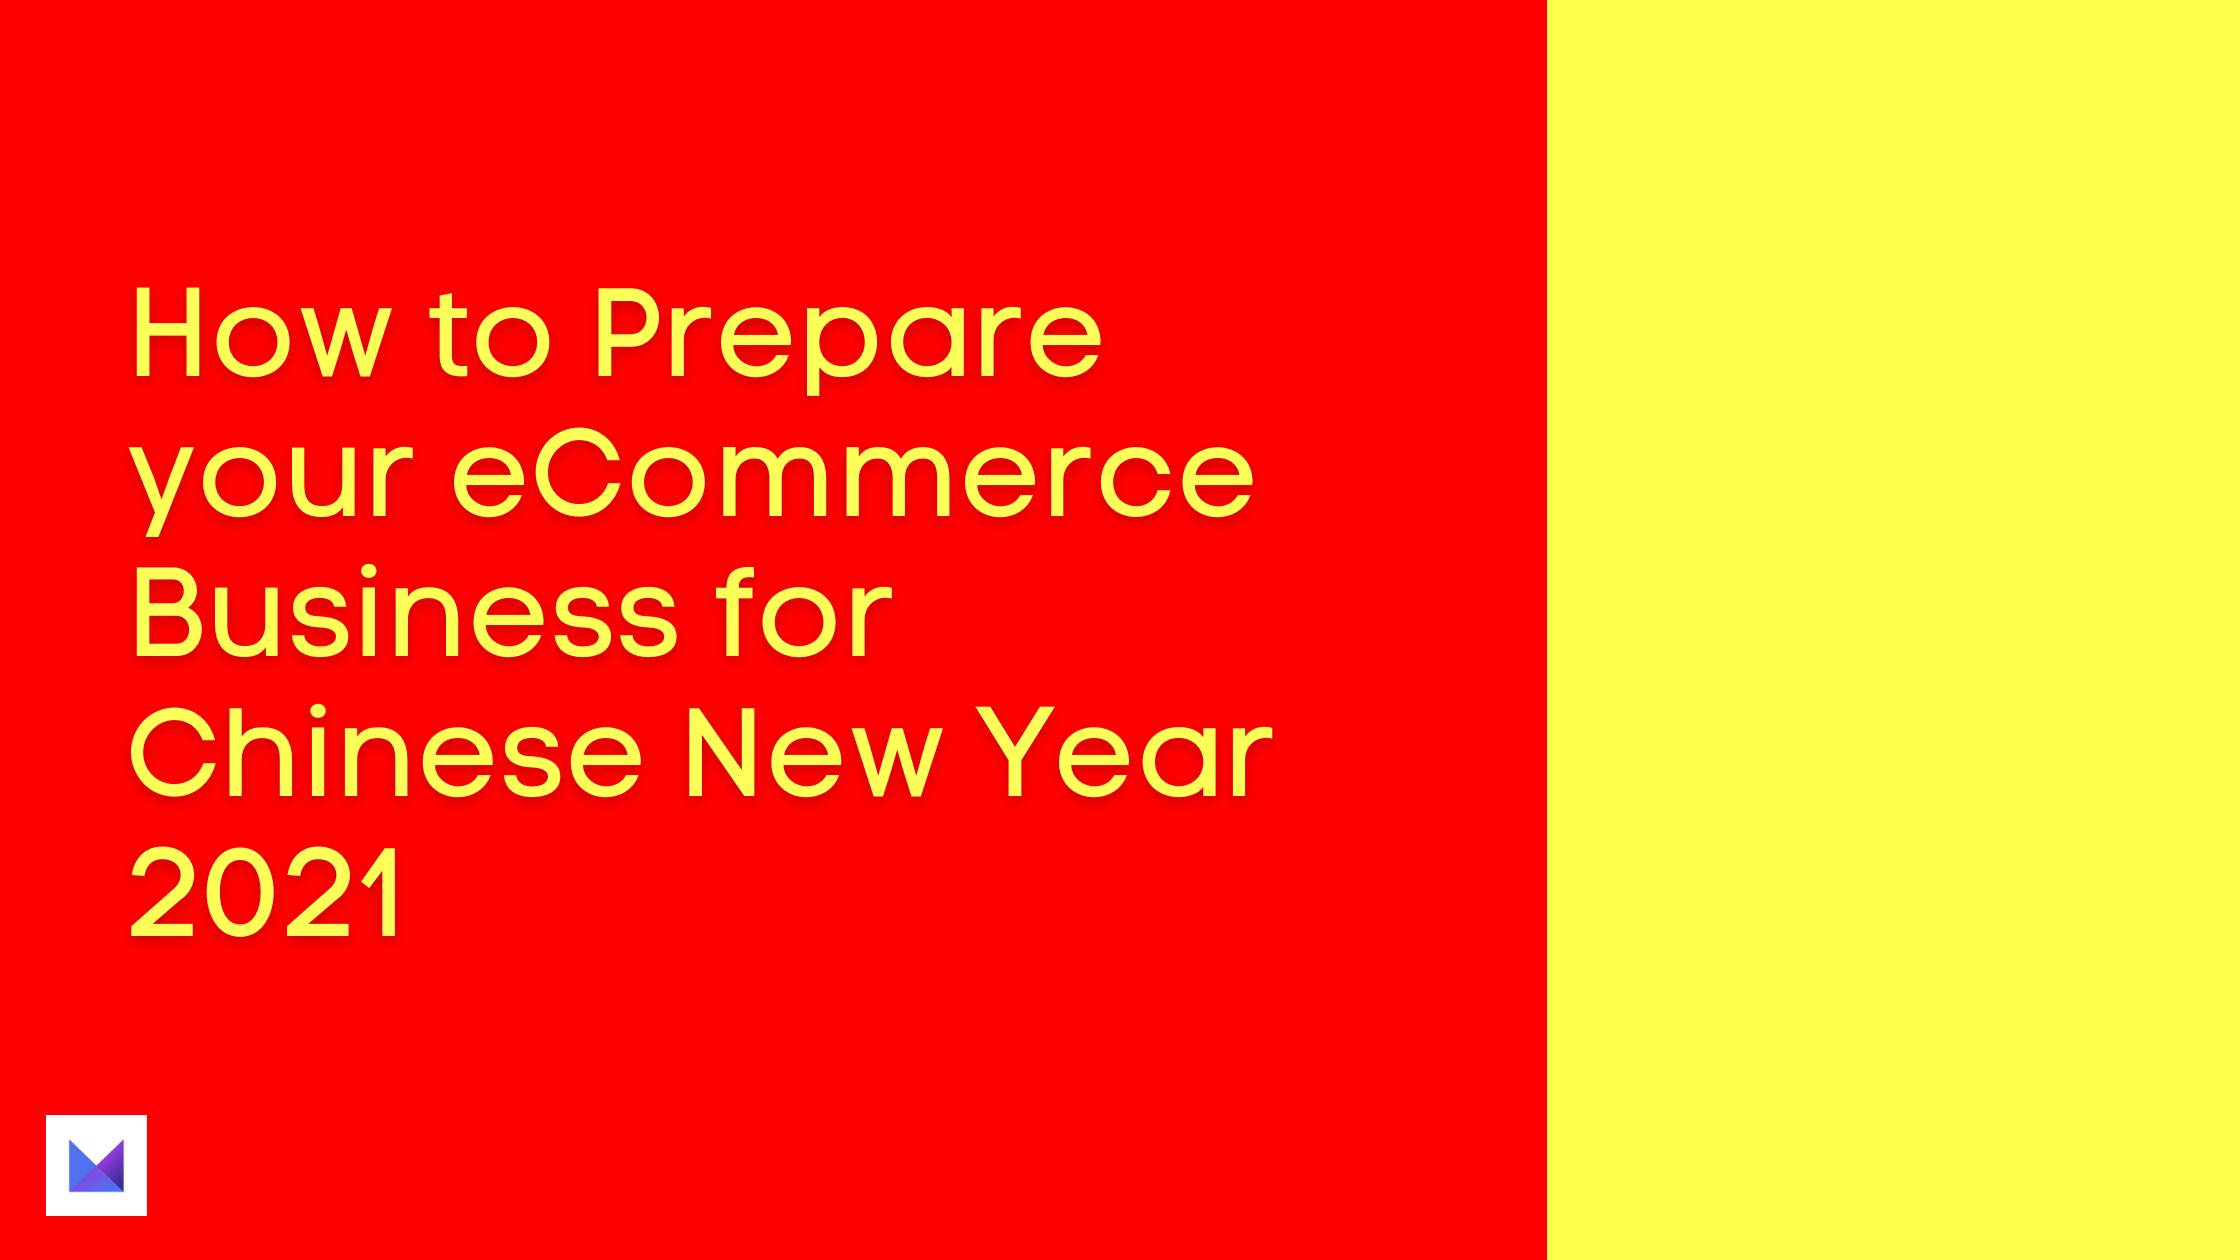 Chinese New Year and eCommerce